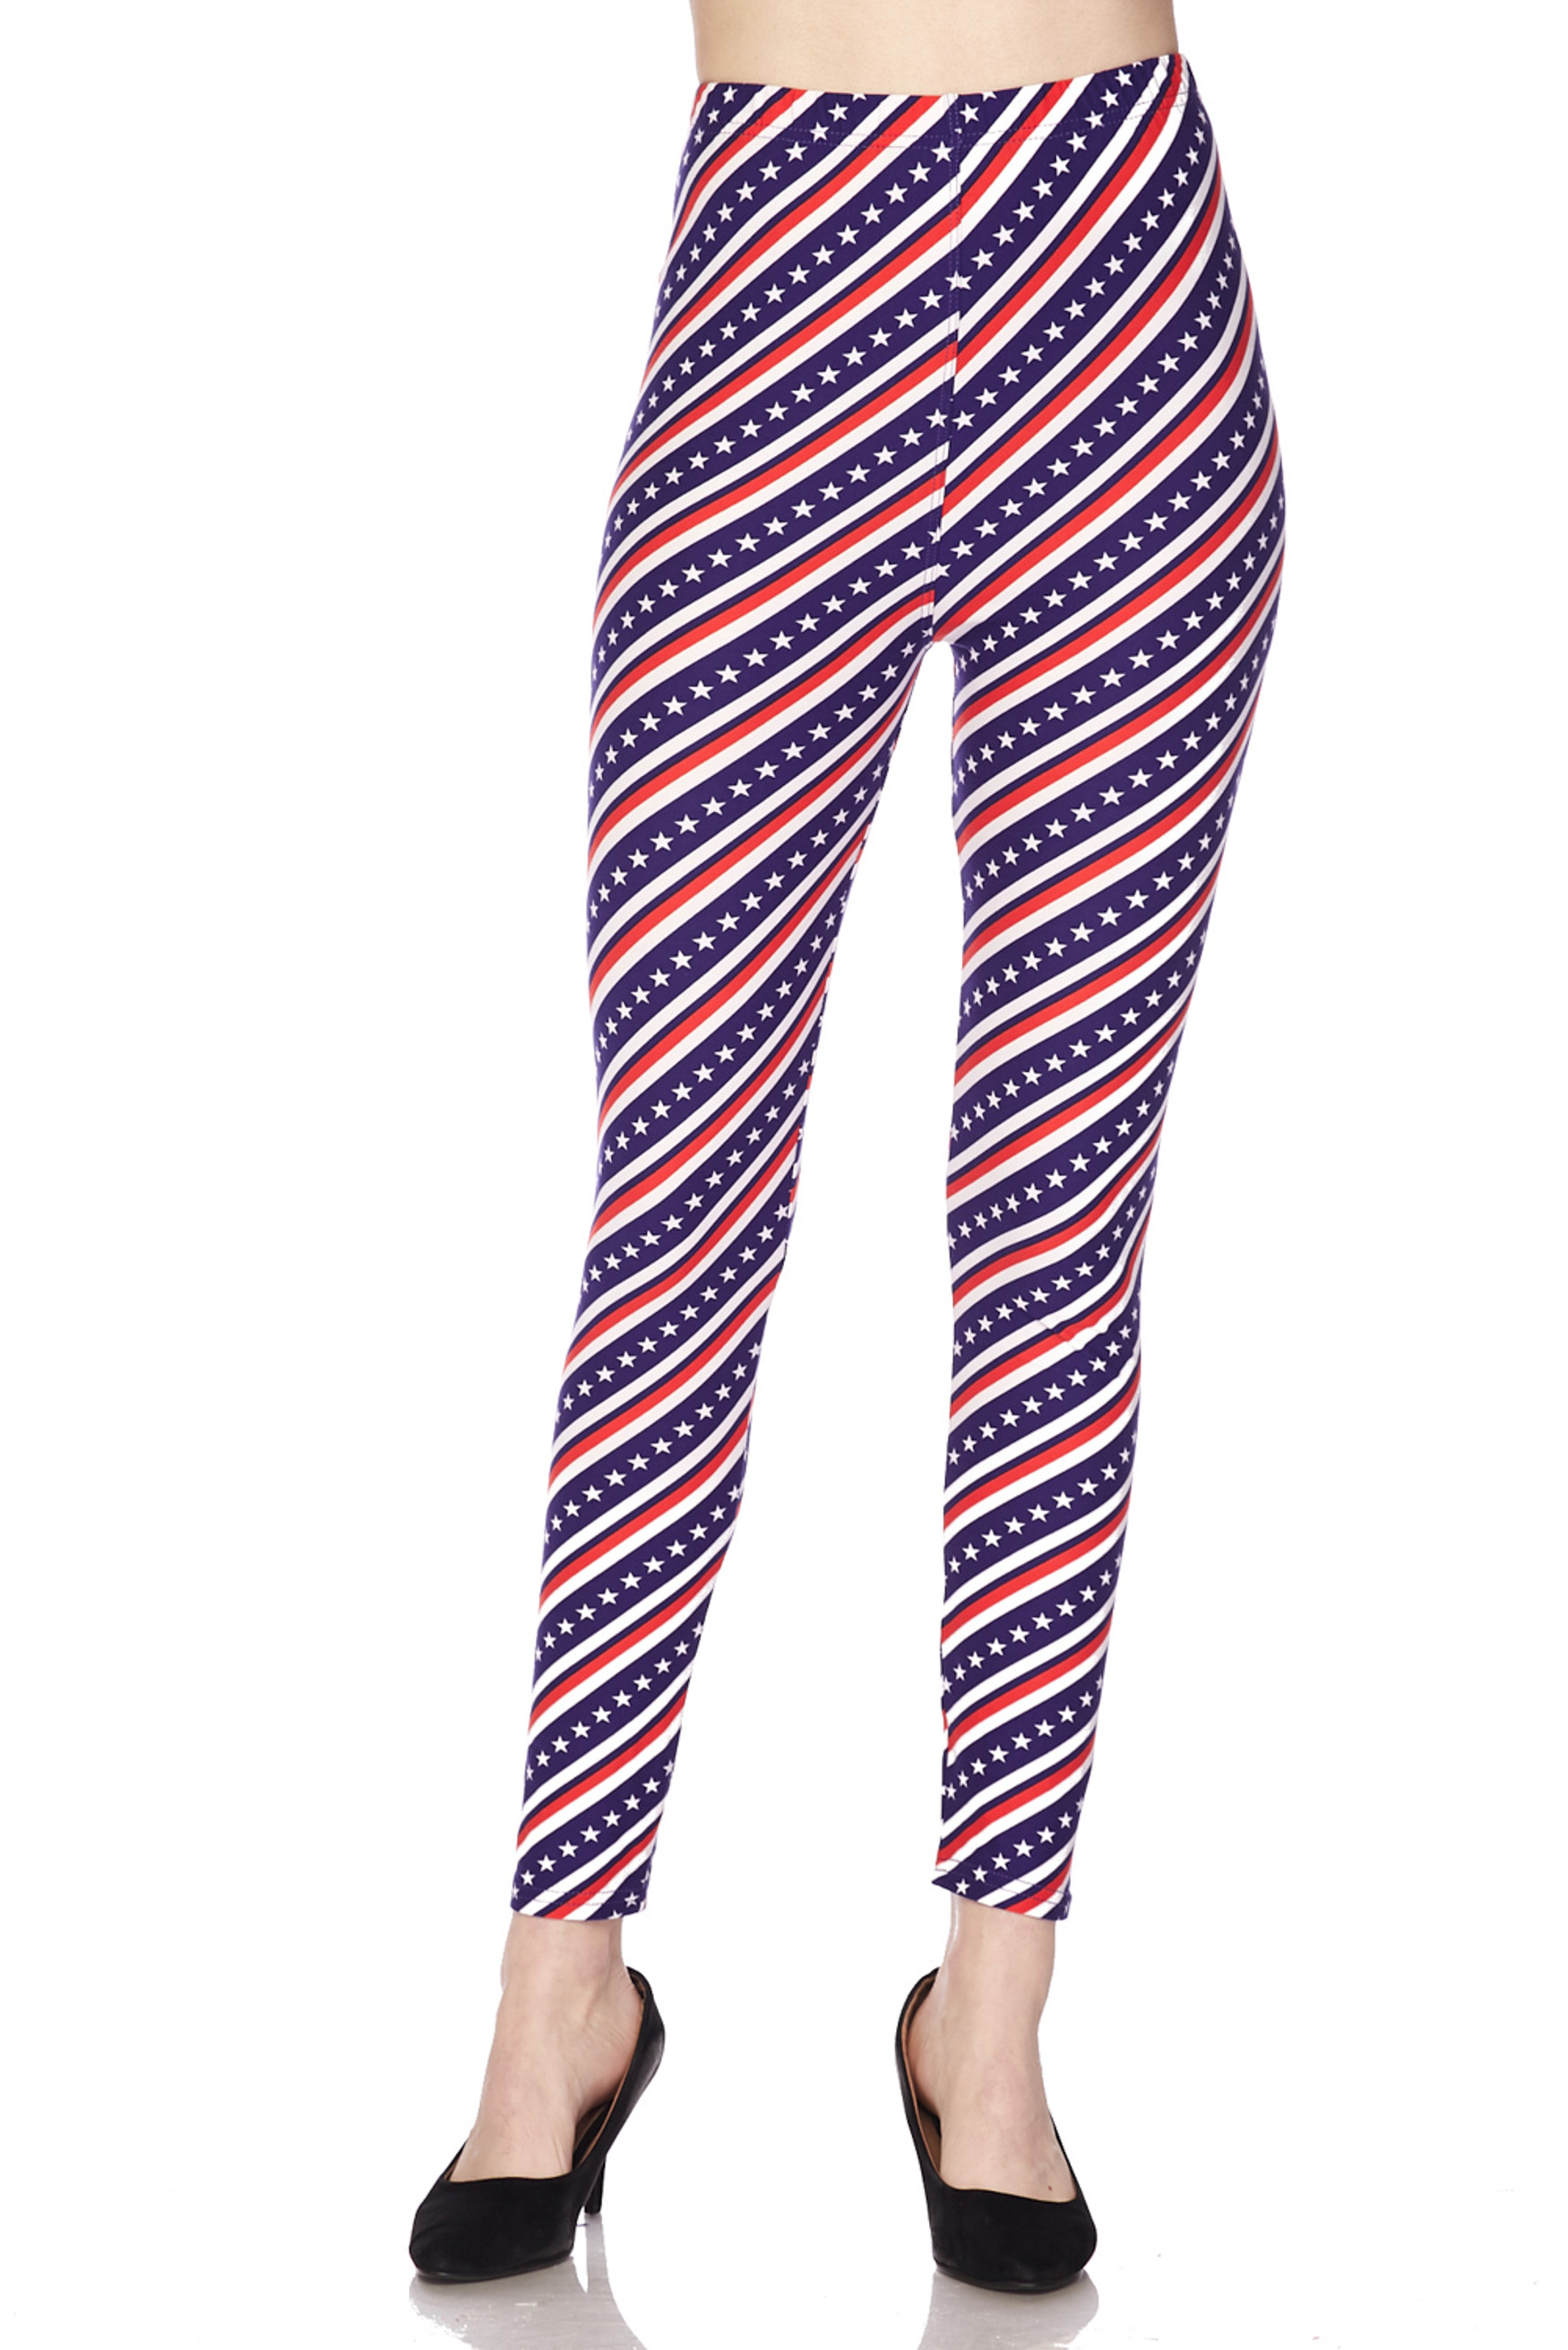 Buttery Soft Spiral Stars and Stripes Leggings